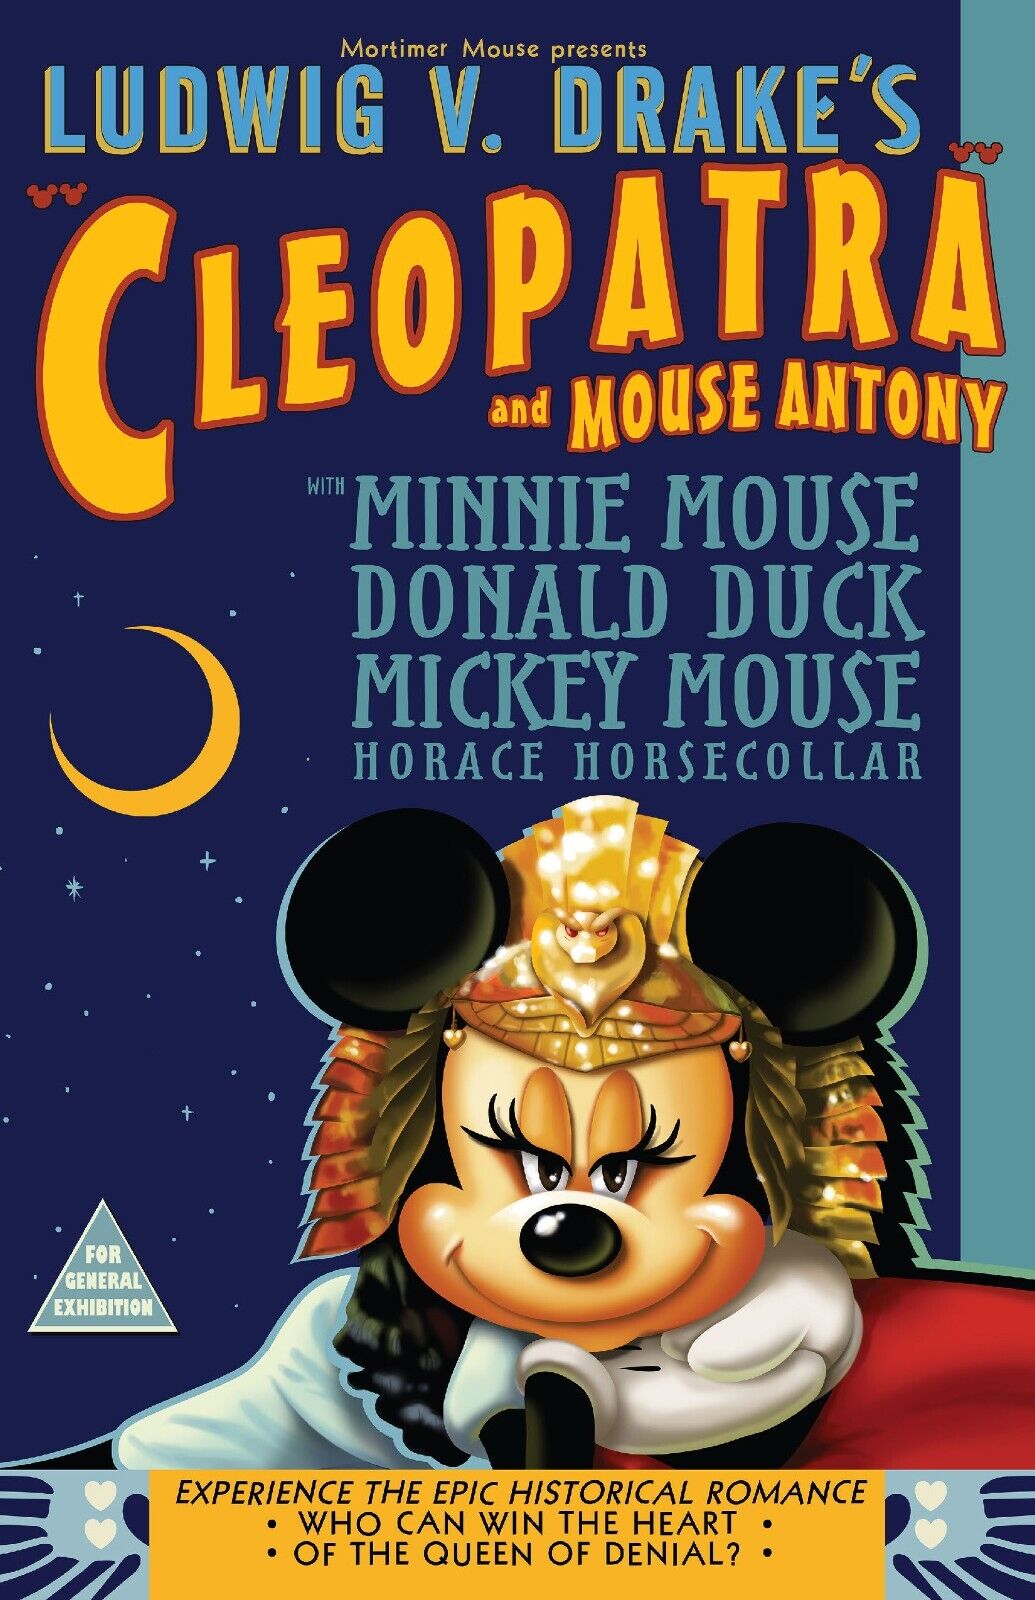 Minnie Mouse Cleopatra and Mouse Anthony Ludwig V. Drakes Poster Print 11x17